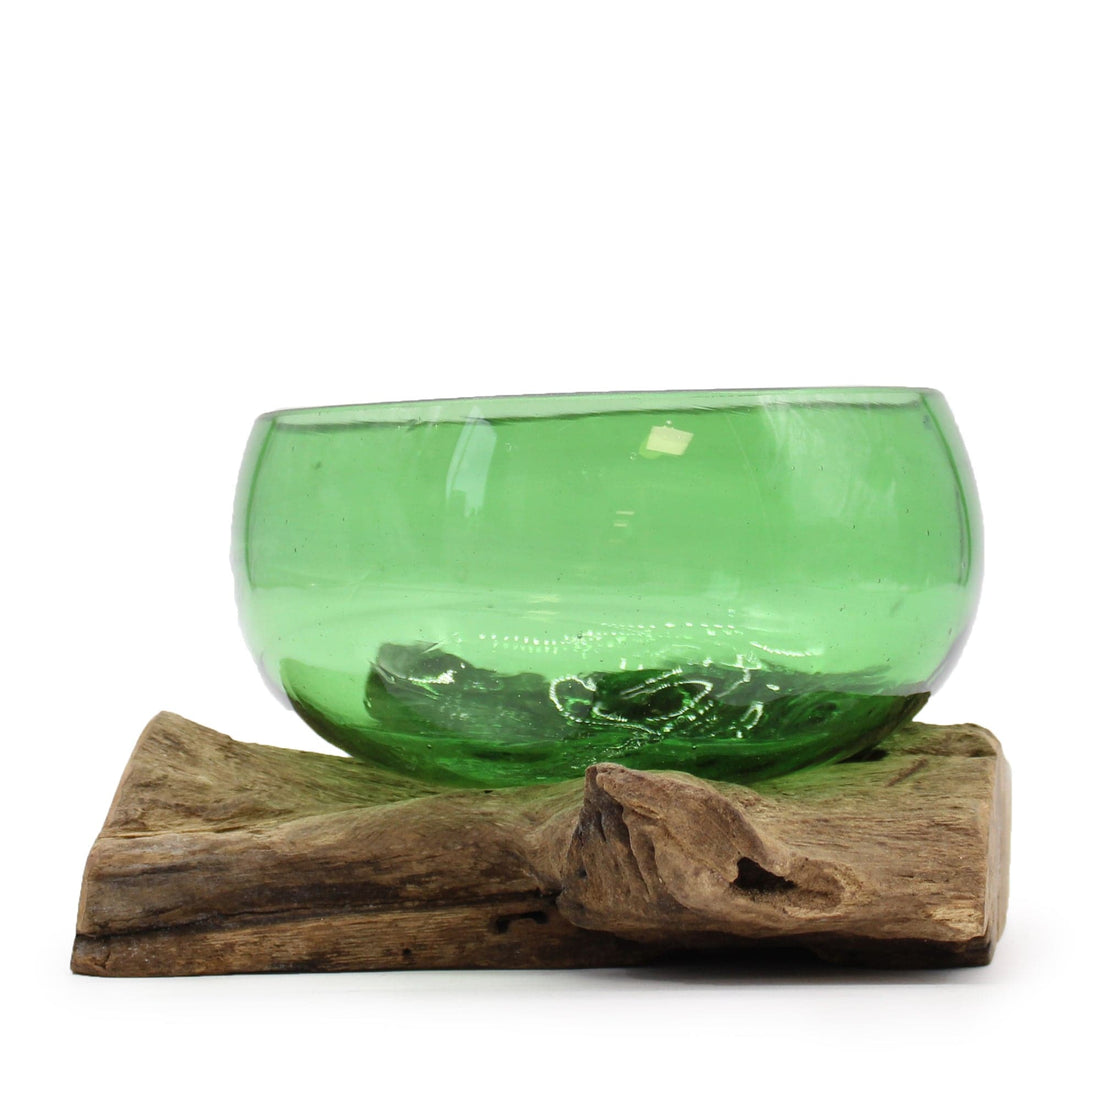 Recycled Beer Bottles - Wide Bowl on Wood - best price from Maltashopper.com RBB-02